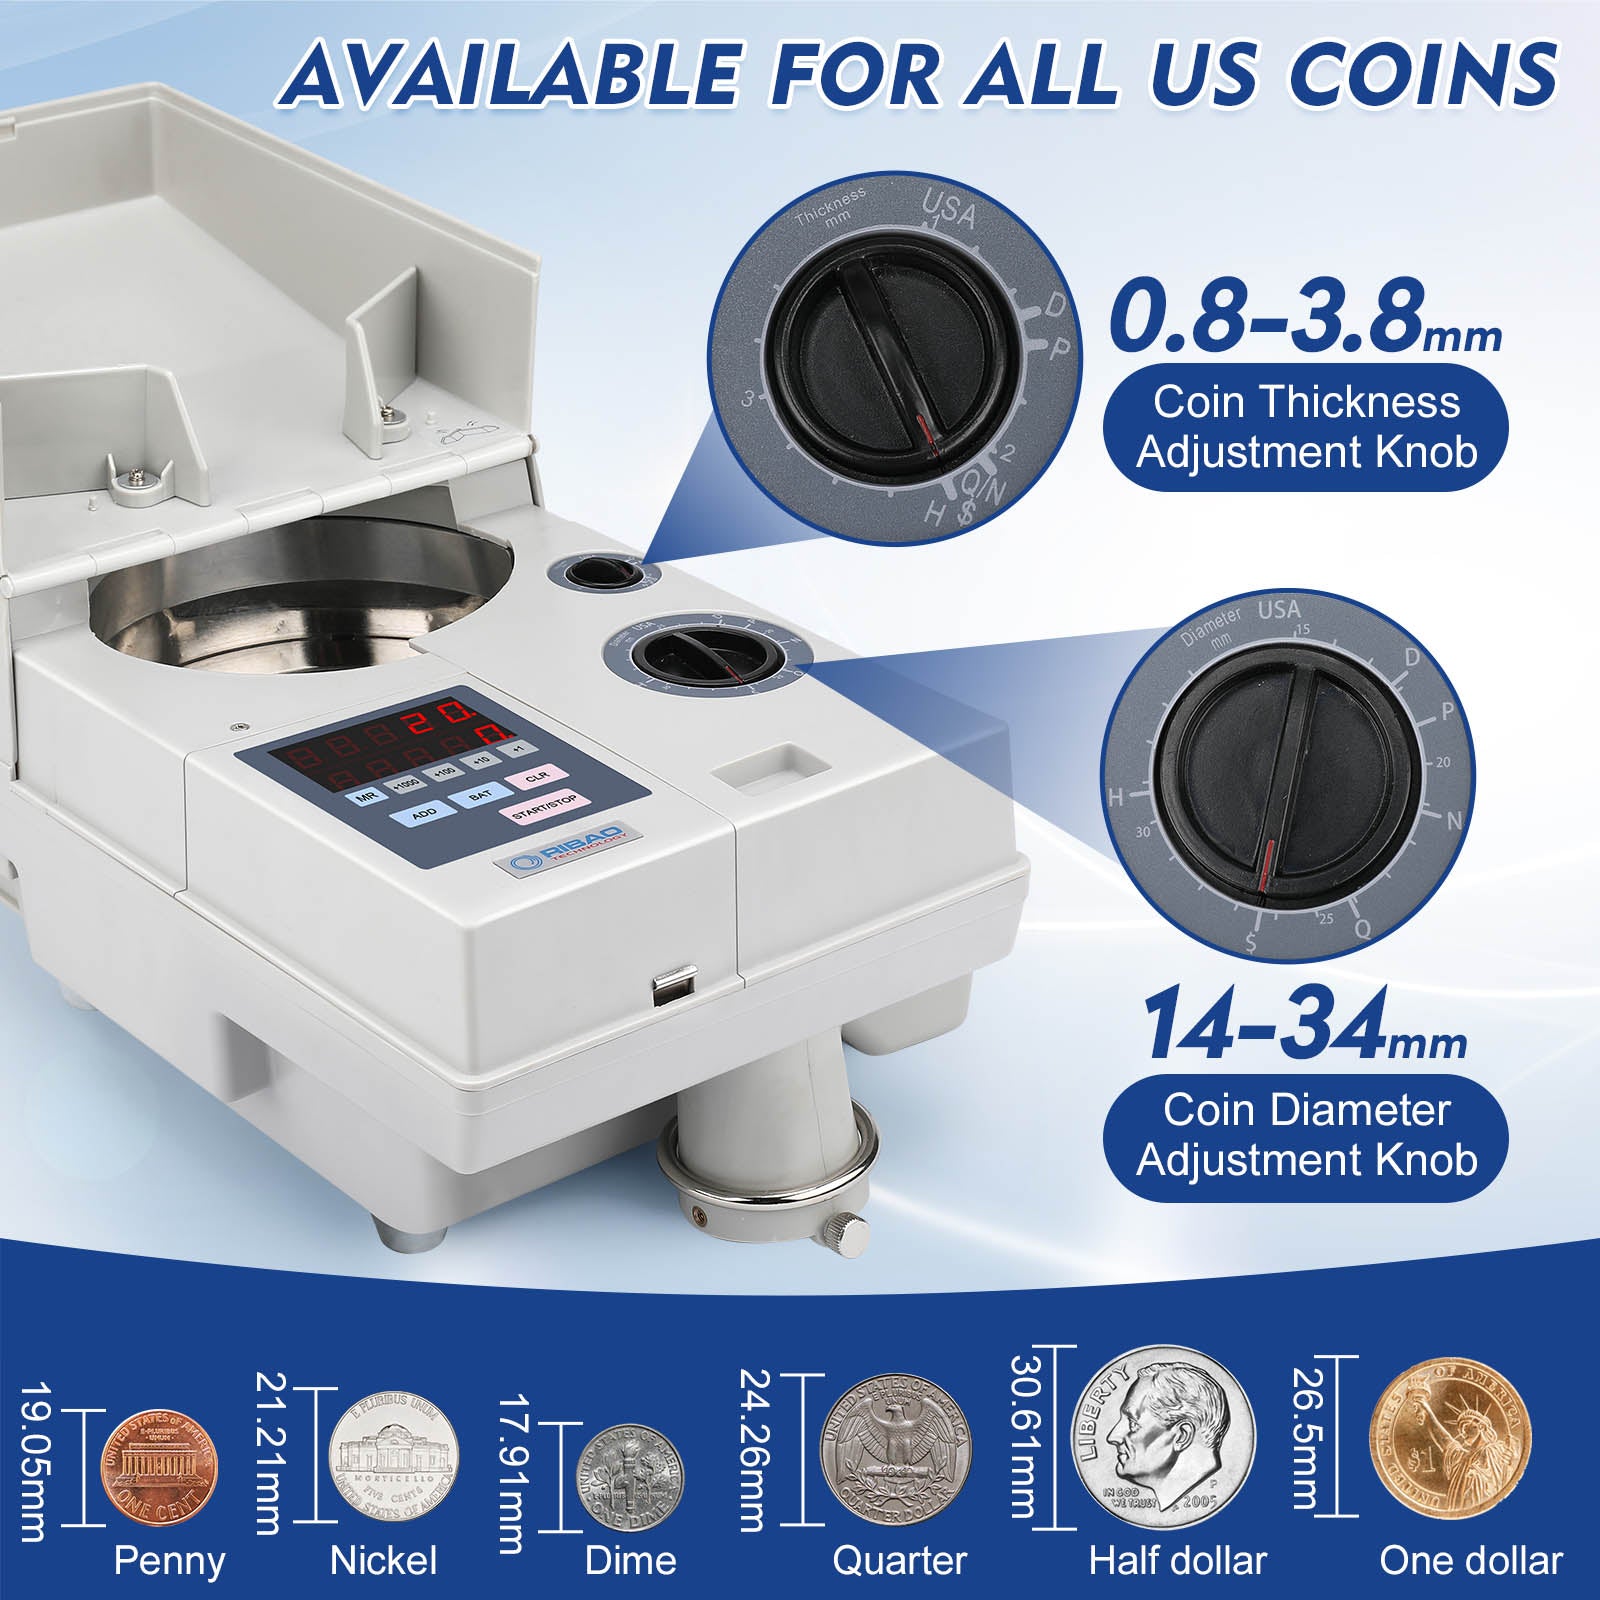 avalable for all us coins within 0.8-3.8mm thickness and 14-34mm diameter